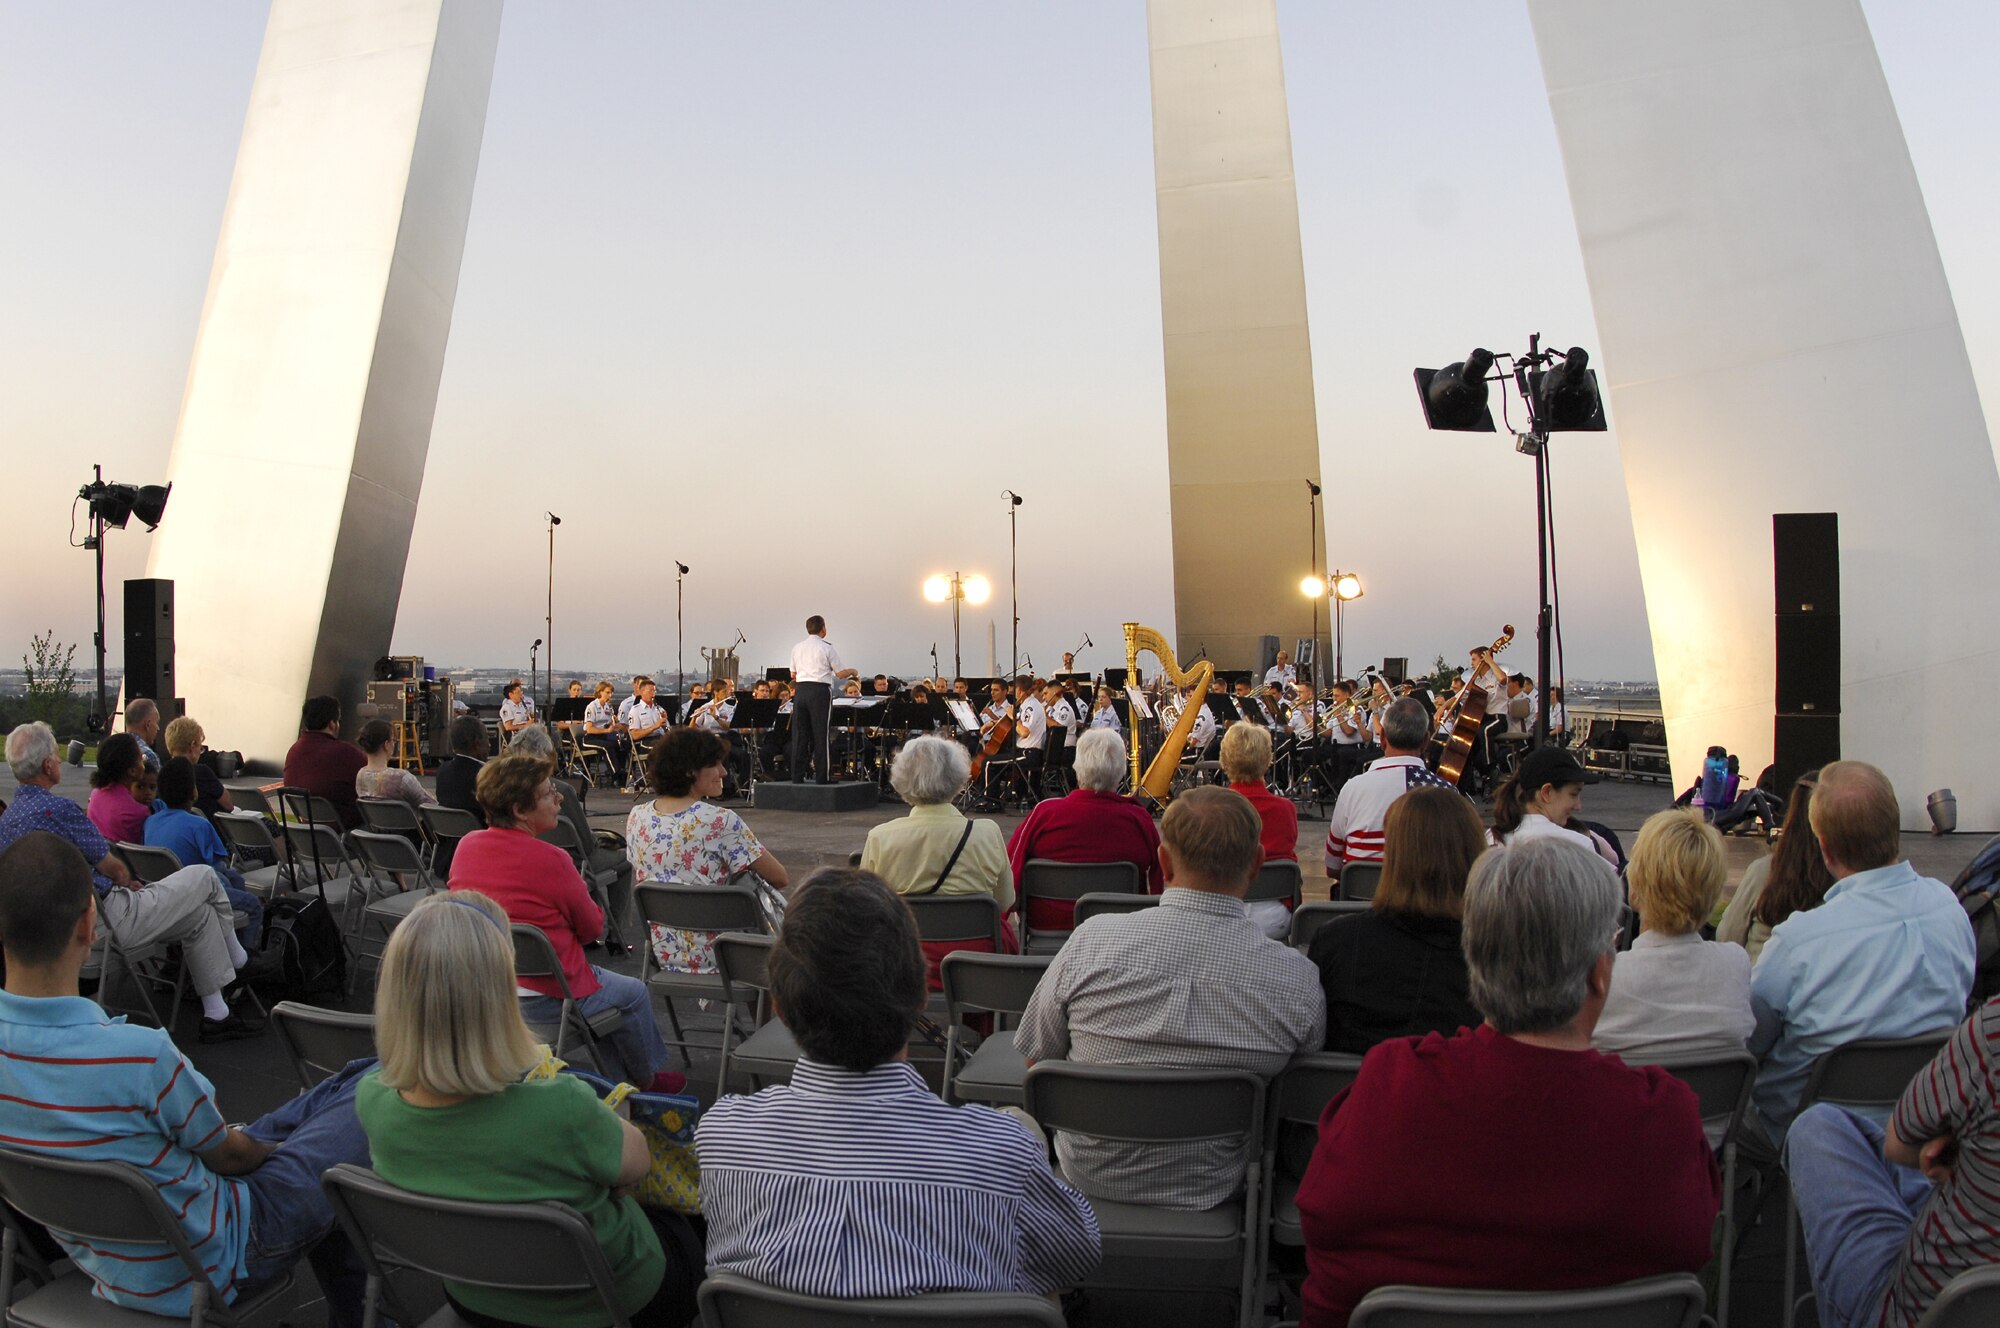 Retired Col. Arnold D. Gabriel, U.S. Air Force Band conductor emeritus, lead the Band in an outdoor concert at the Air Force Memorial June 6. The program, which paid homage to the D-Day invasion, June 6, 1944, included “Hymn to the Fallen,” from “Saving Private Ryan” by Hollywood film composer and U.S. Air Force alumnus John Williams. Colonel Gabriel served as commander of the Band from 1964-1985. Prior to his commissioning, he served as a machine gunner with the famed 29th Infantry Division during World War II, landing on Omaha Beach on D-Day. He was twice awarded the Bronze Star and earned the French Croix de Guerre. (U.S Air Force photo by Airmen 1st Class Alexandre Montes)  